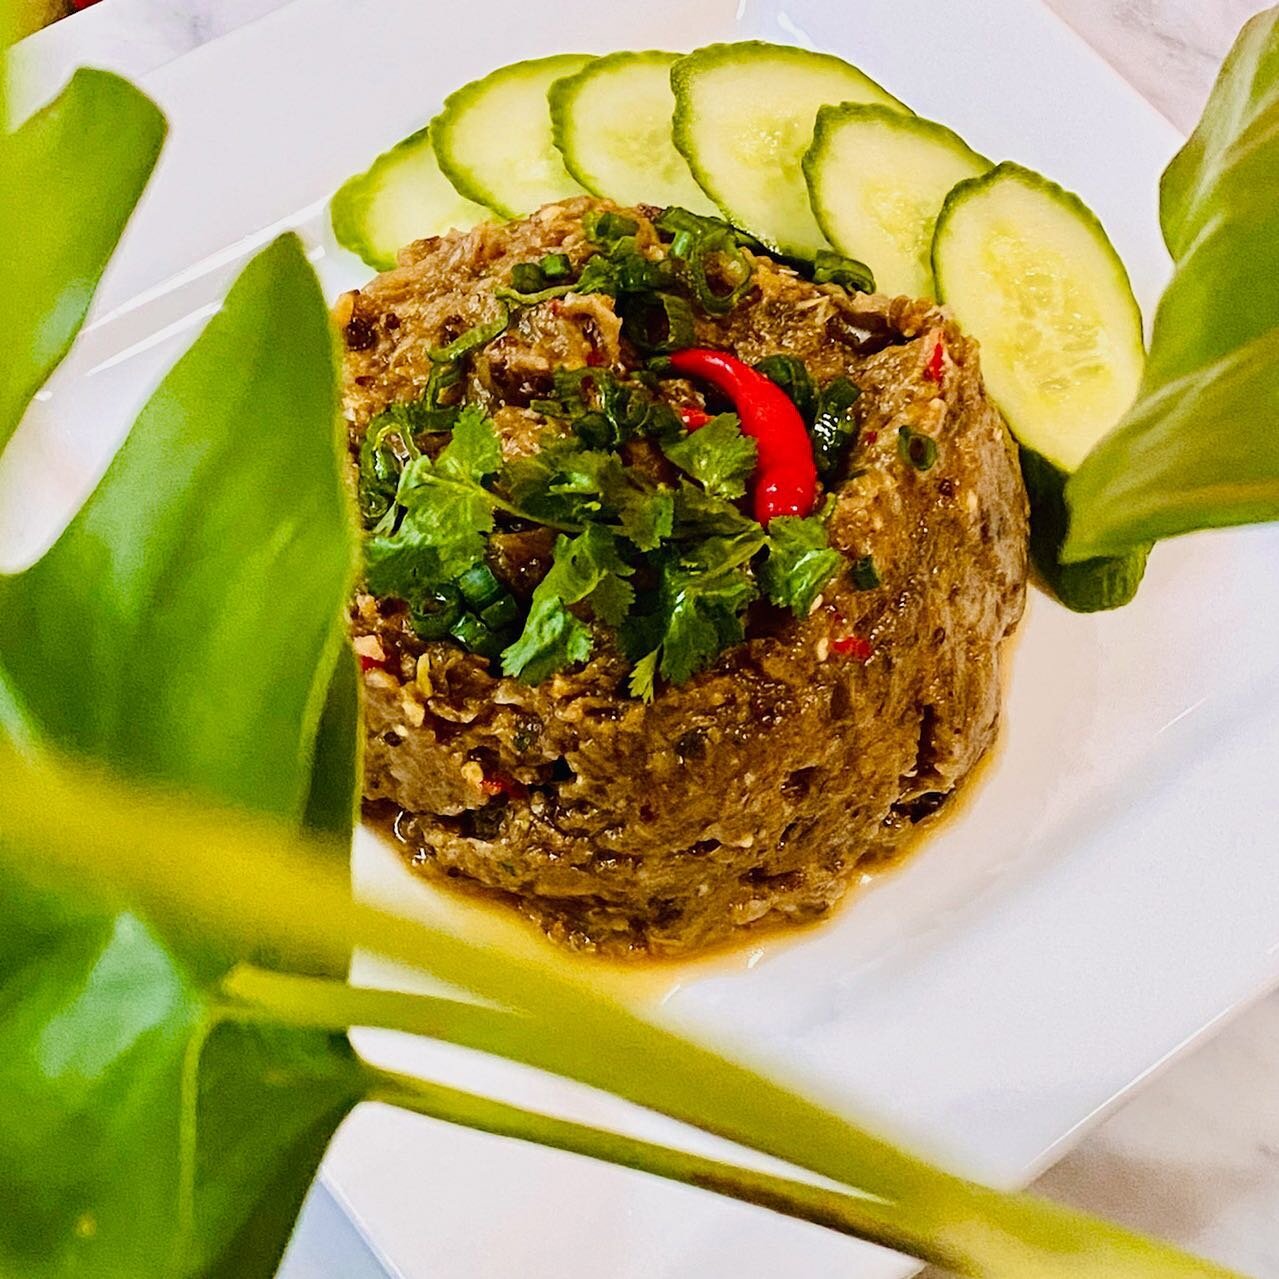 #jeow is the 🇱🇦 Lao word for sauce or dip. 

If you have a mortar and pestle you can almost turn anything into a Jeow and then have warm sticky rice to smush into it.

Pictured is Jeow Mak Keua translated as Eggplant dip. Roasted eggplant, herbs, a